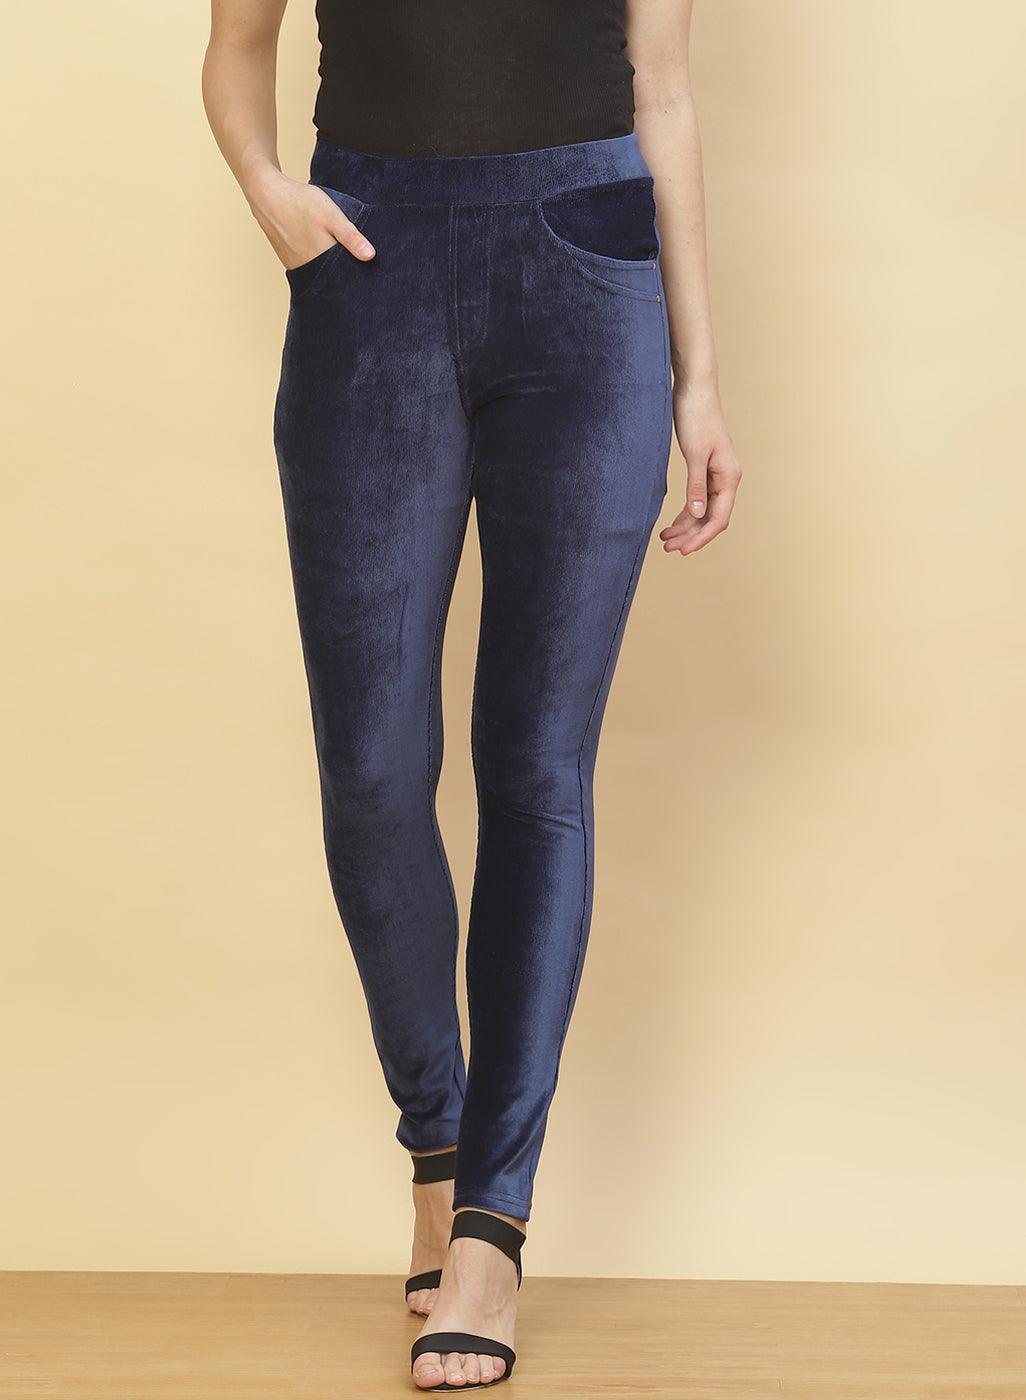 Blue Plain Edhardy Women Low Rise Enzyme Wash Jeggings at best price in  Bengaluru